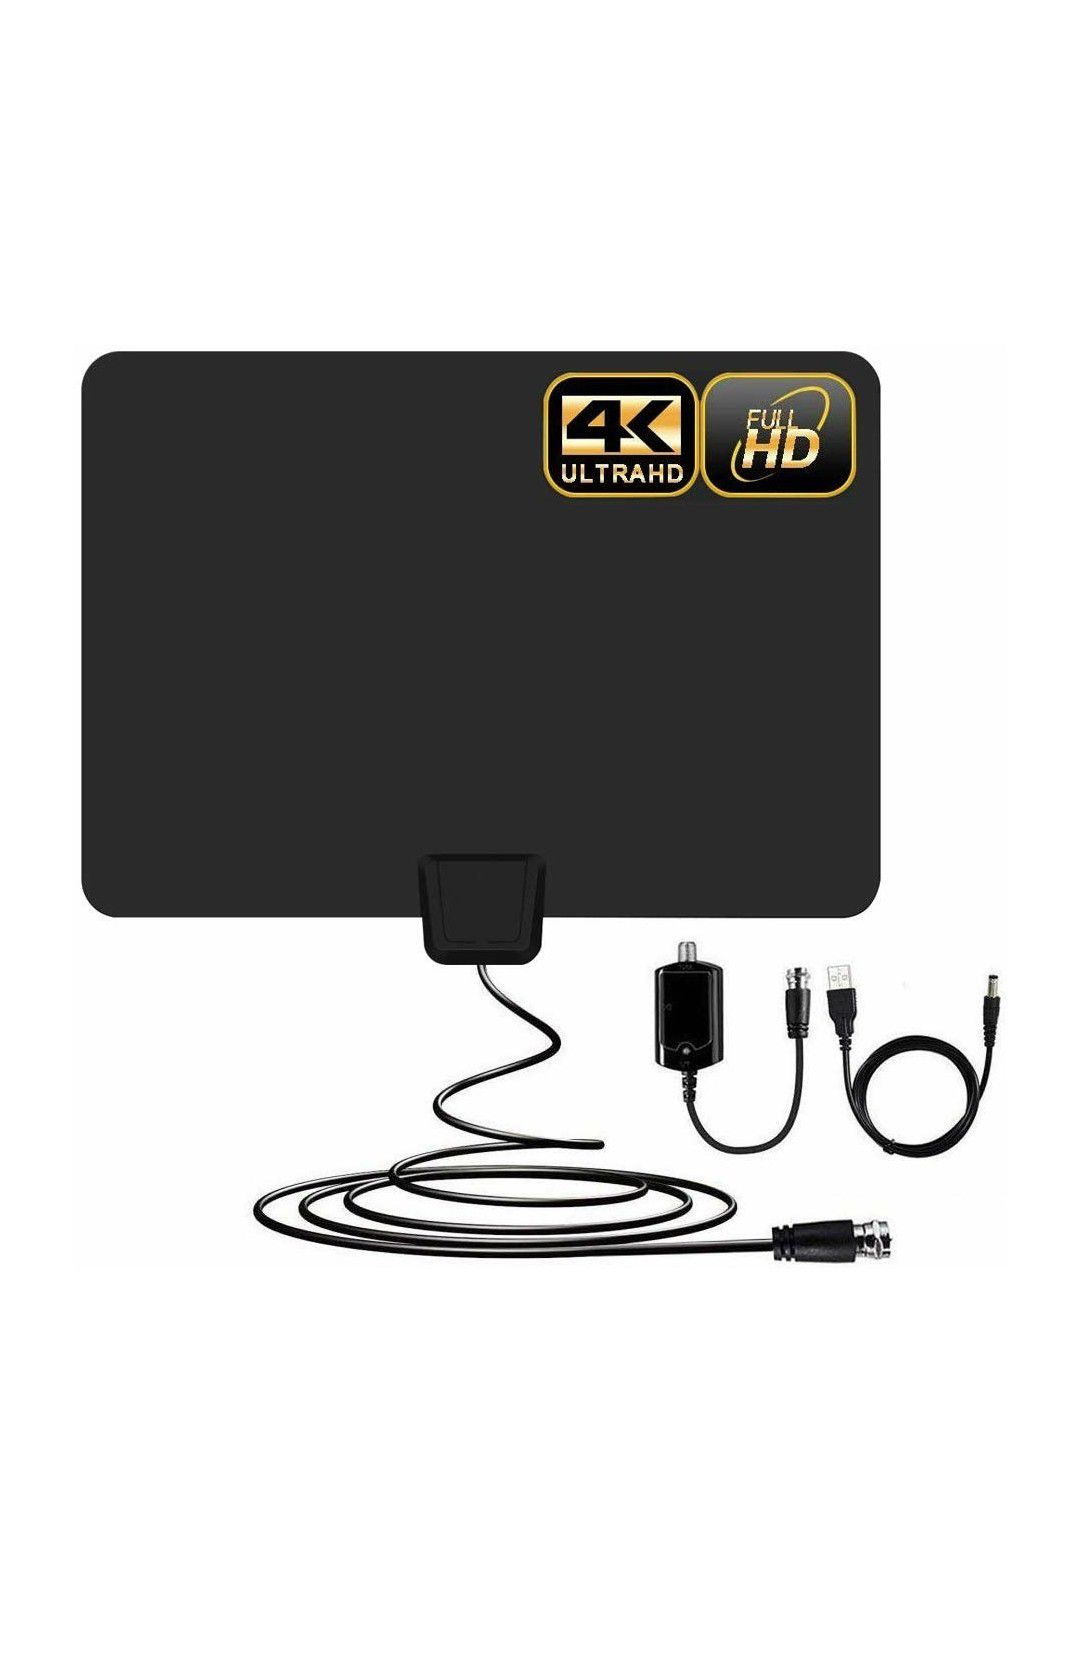 Newest]Indoor Amplified HD Digital TV Antenna up to 100+ Miles Range -PACOSO HDTV Antenna with Amplifier Signal Booster for 4K 1080p Fire tv Stick